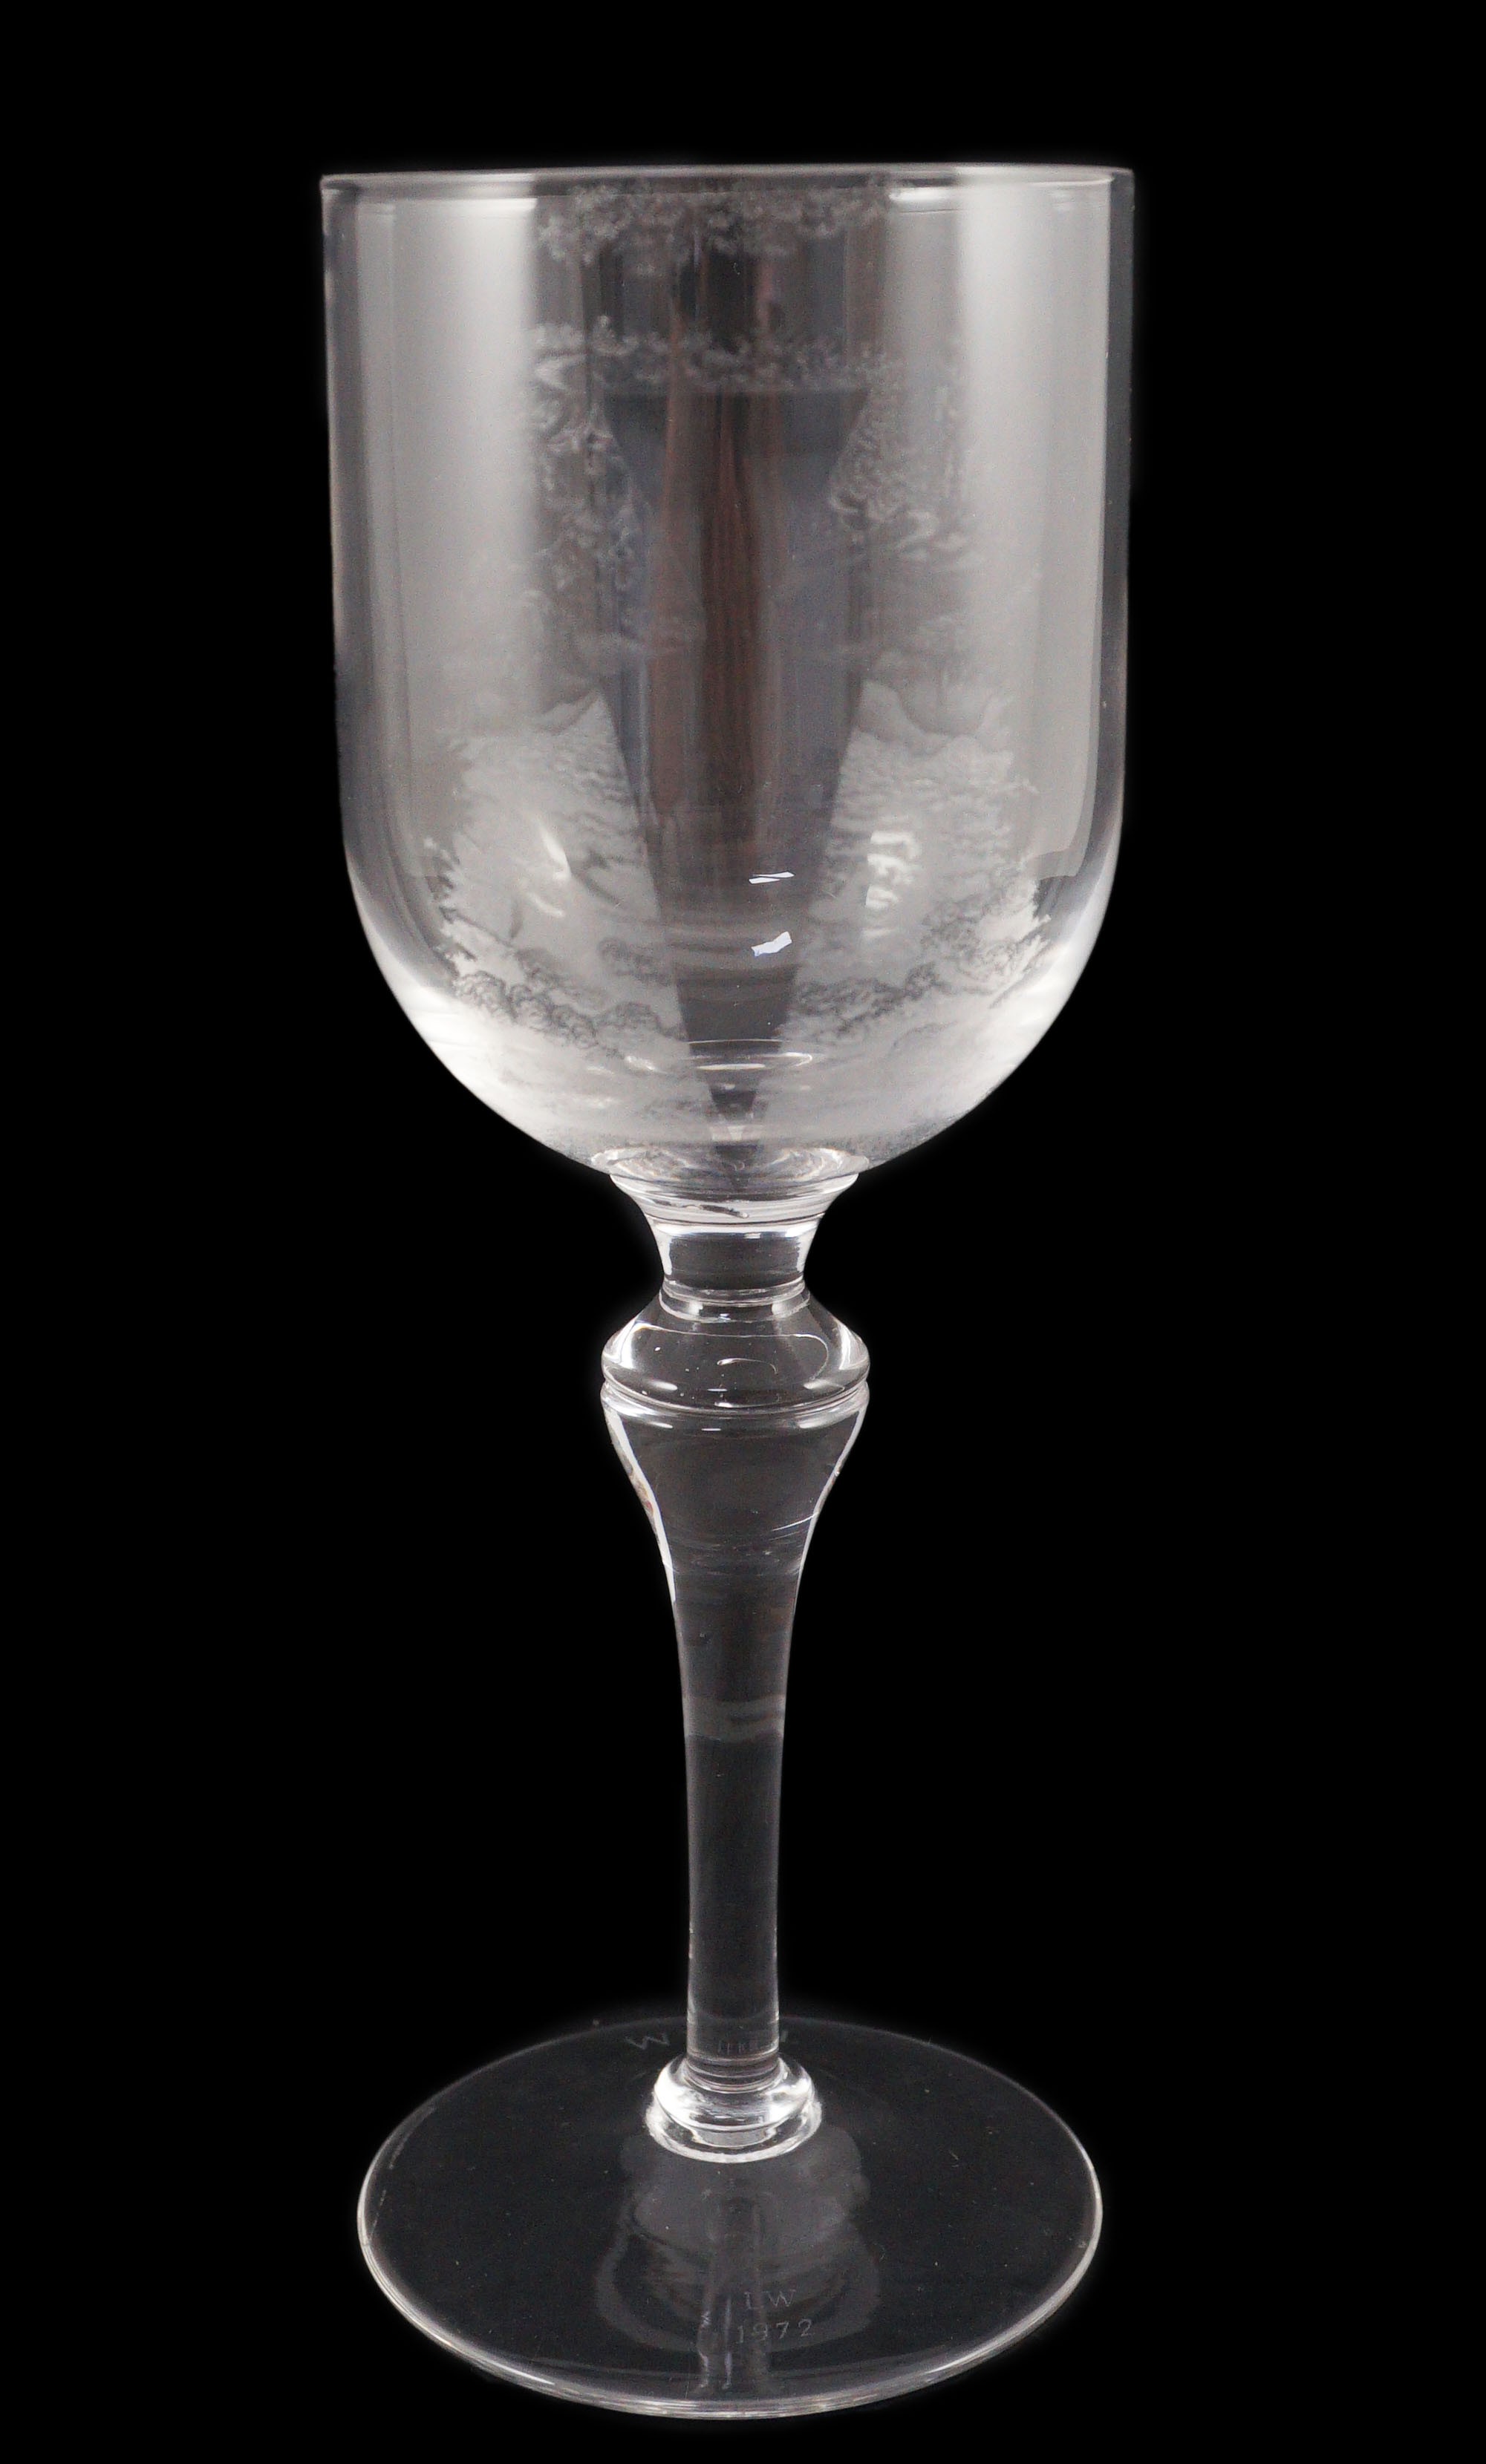 Laurence Whistler CBE (1912-2000), 'TERM' an engraved glass goblet together with a limited edition book 276/1400, page 28 and plate 80 with reference to 'TERM' Goblet 24cm high